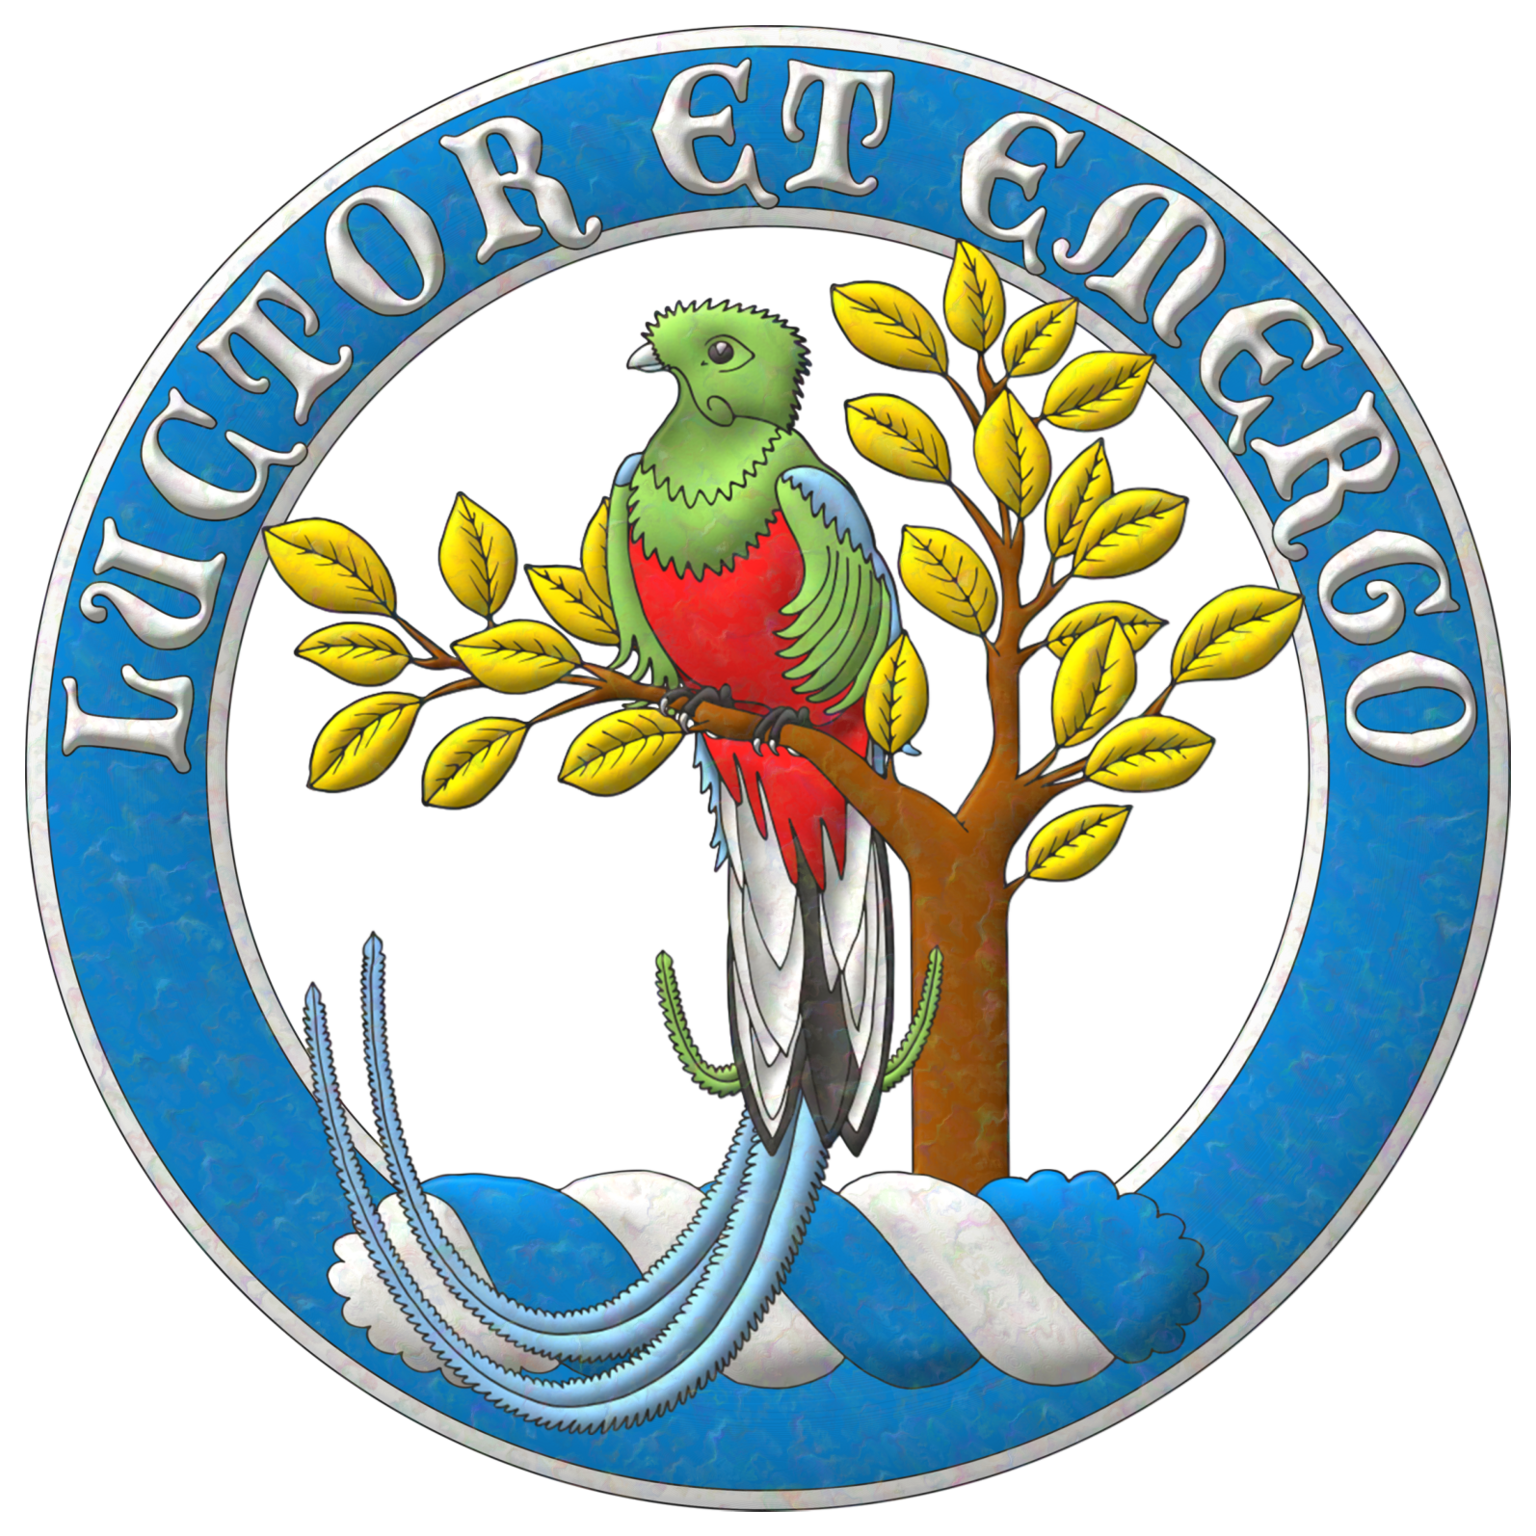 This is the heraldic badge of Antonio Ruiz Porras designed by him and emblazoned by me. Blazon:  Upon a wreath Argent and Azure a quetzal perched in a tree branch Proper, leaved Or, surrounded by an annulet Azure, fimbriated and inscribed in chief with the motto «Luctor et Emergo» Argent.